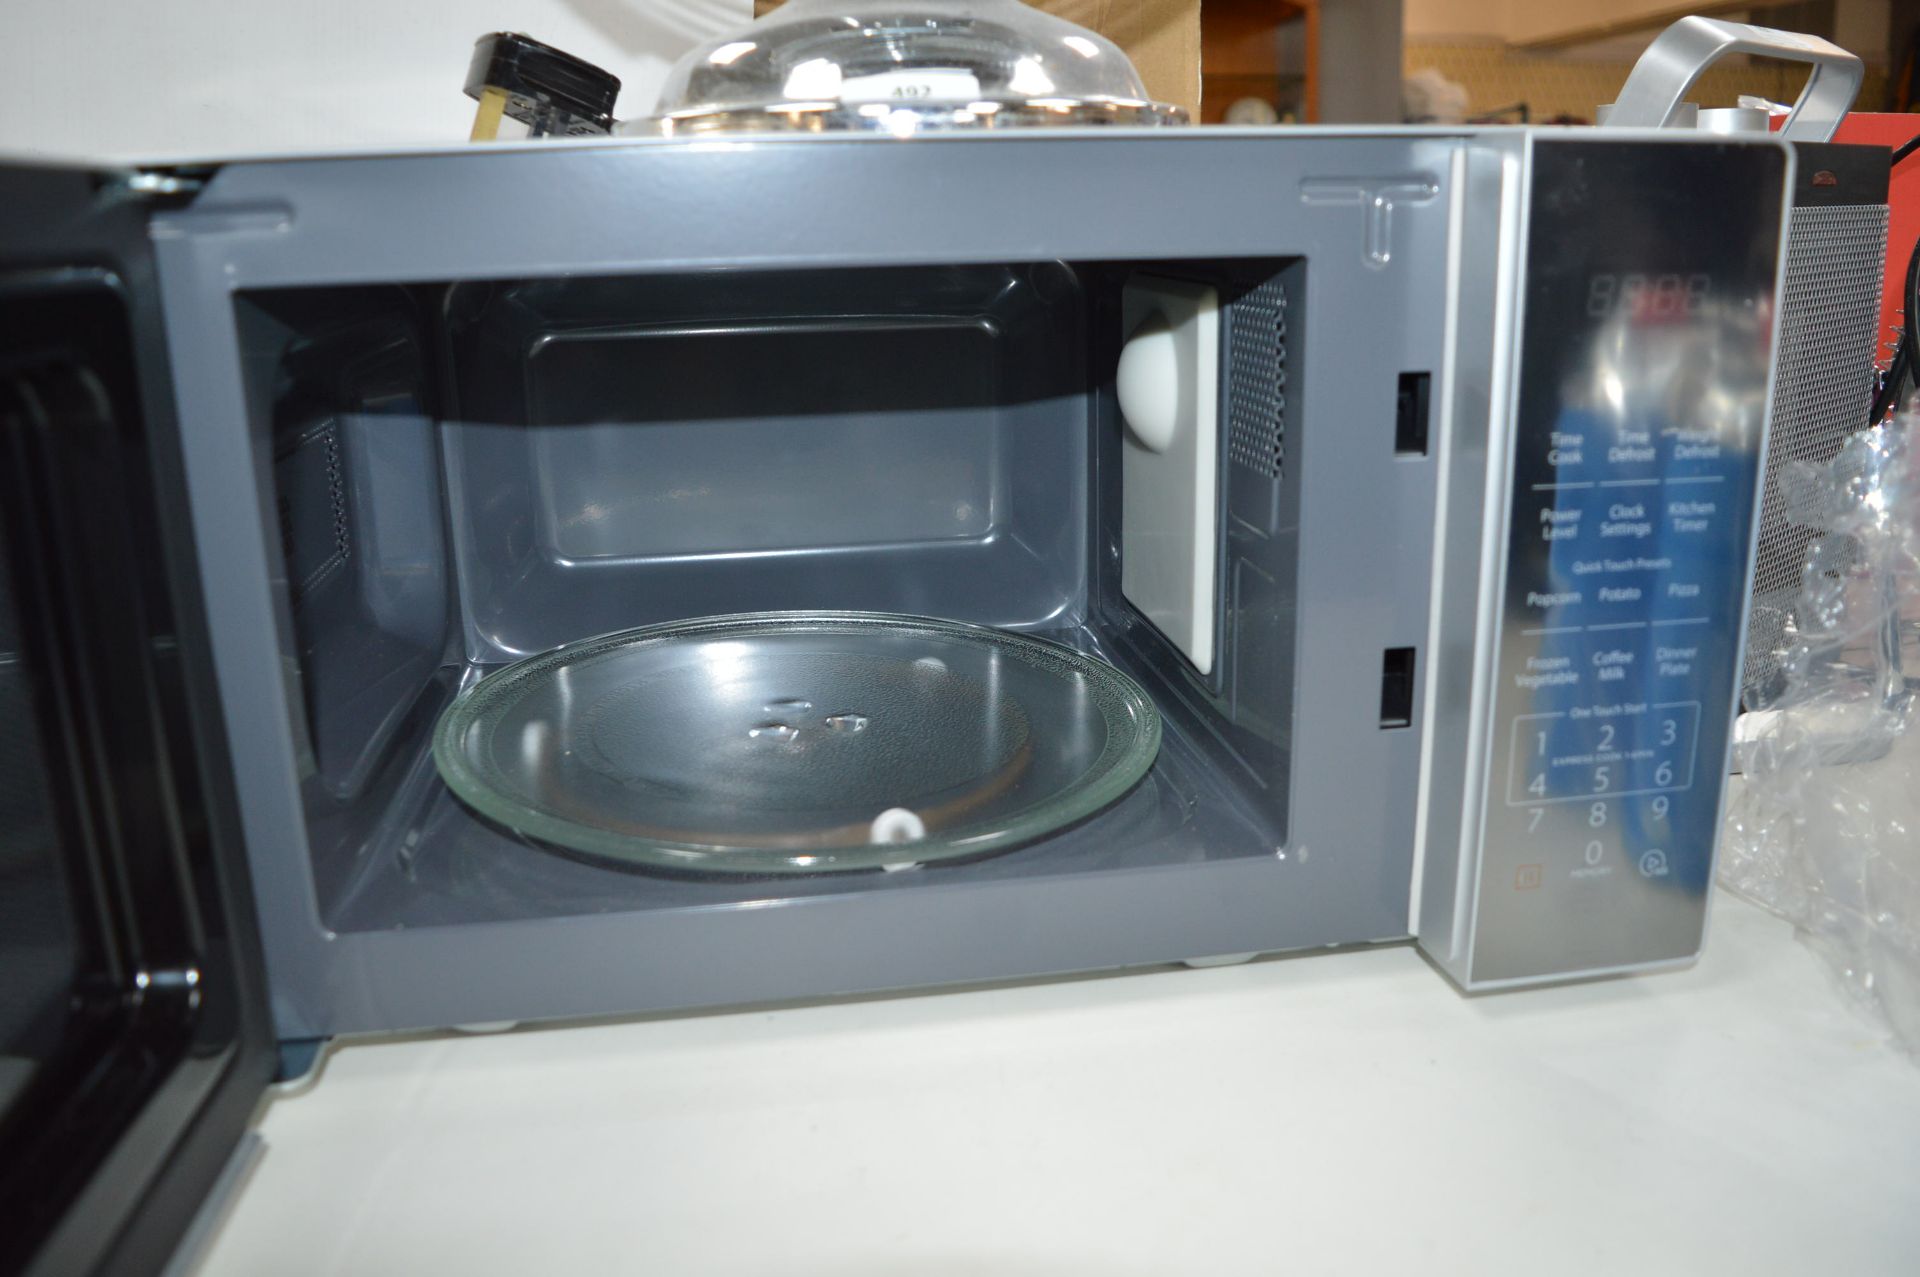 *Breville Microwave Oven - Image 2 of 2